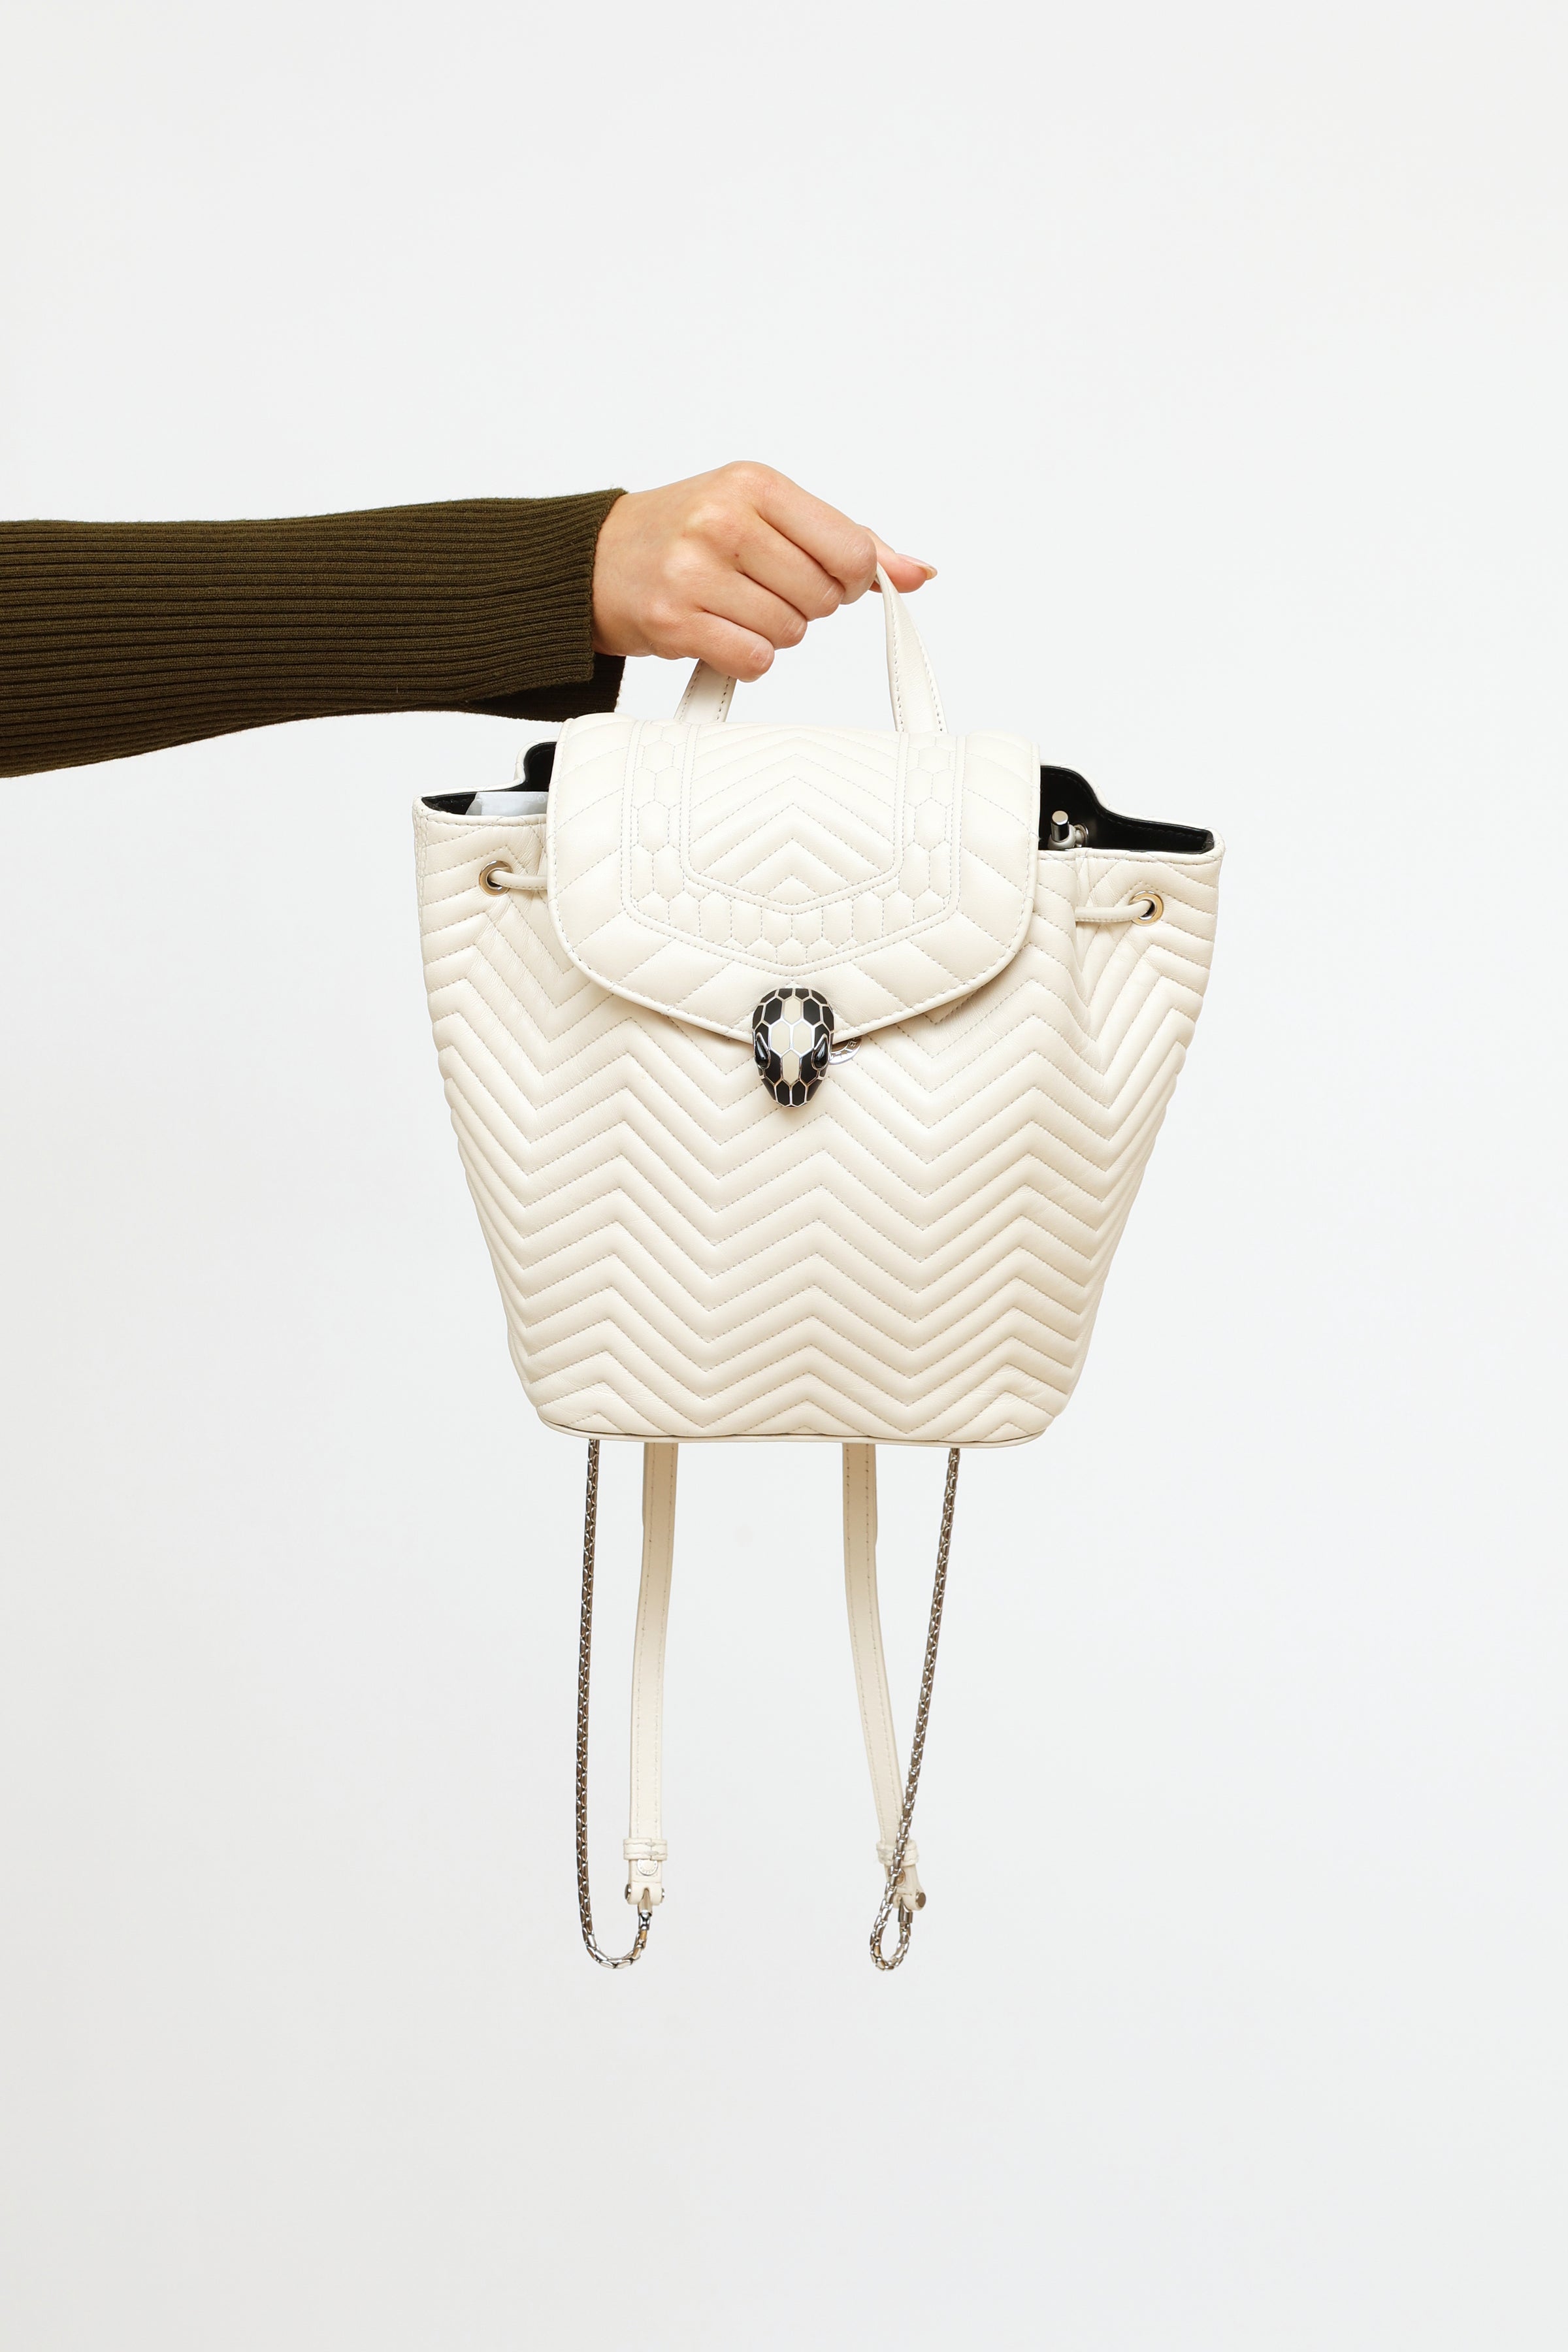 Serpenti Forever Top Handle